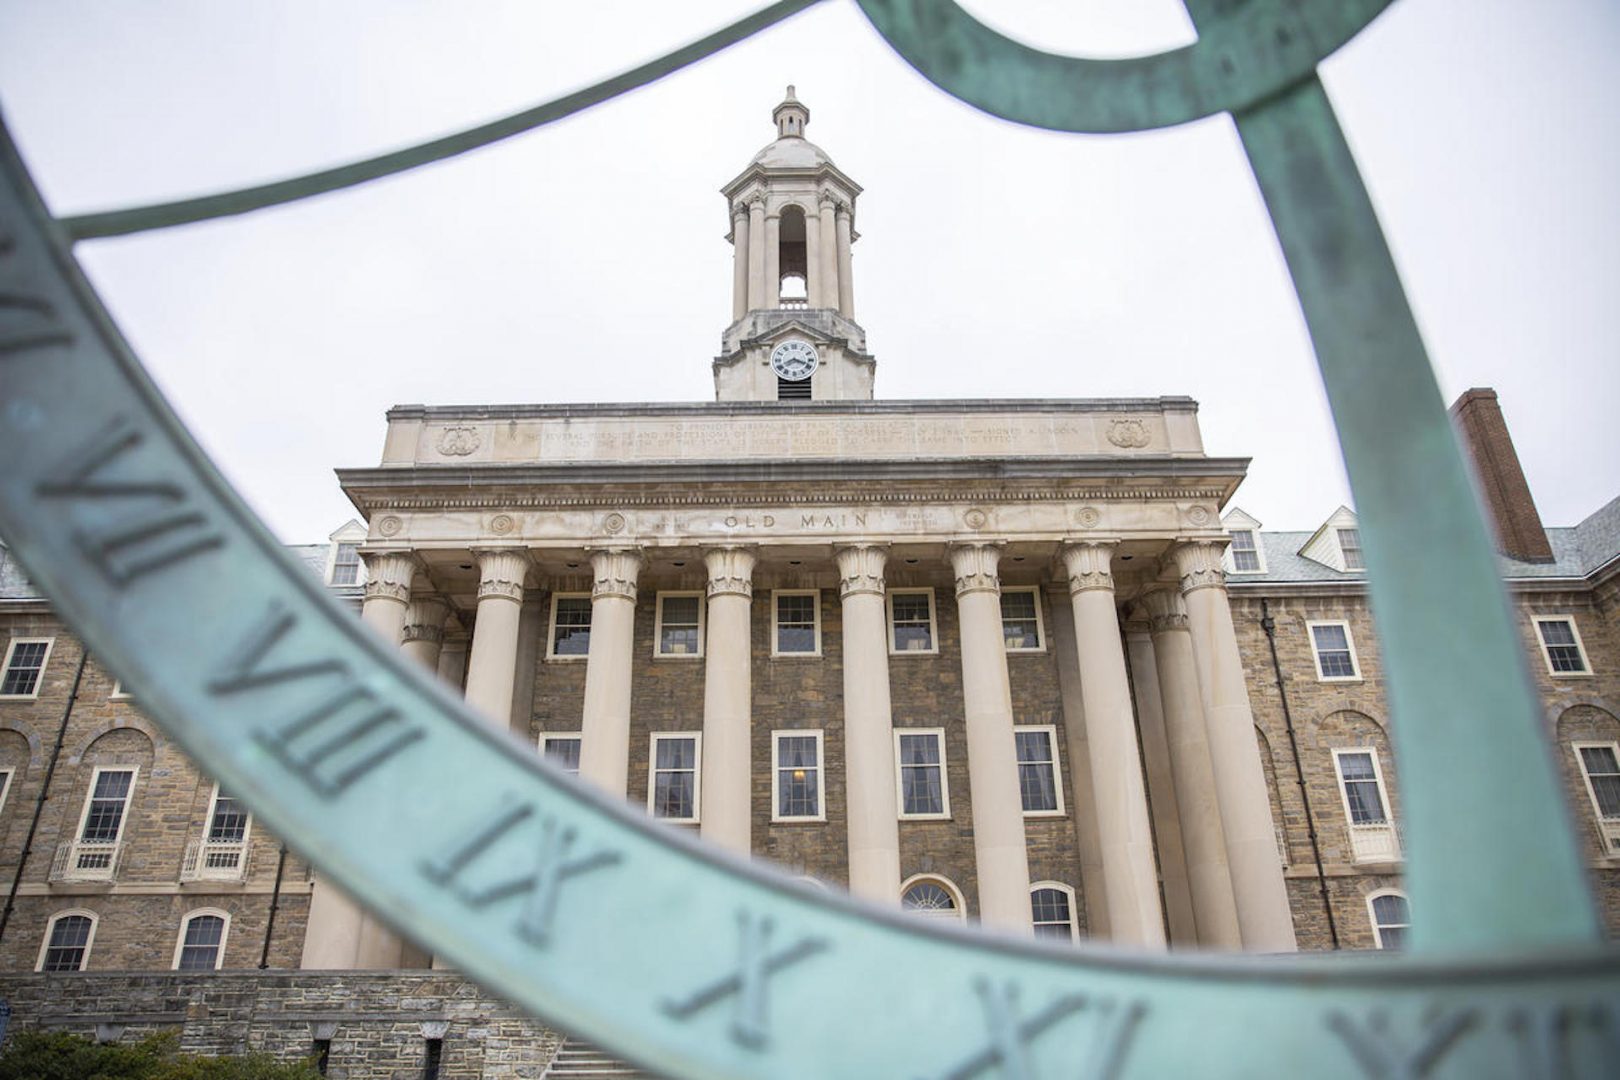 Penn State faculty members are calling for more input from professors, students and staff in picking the next president of the university to replace Eric Barron, who is retiring in 2022.